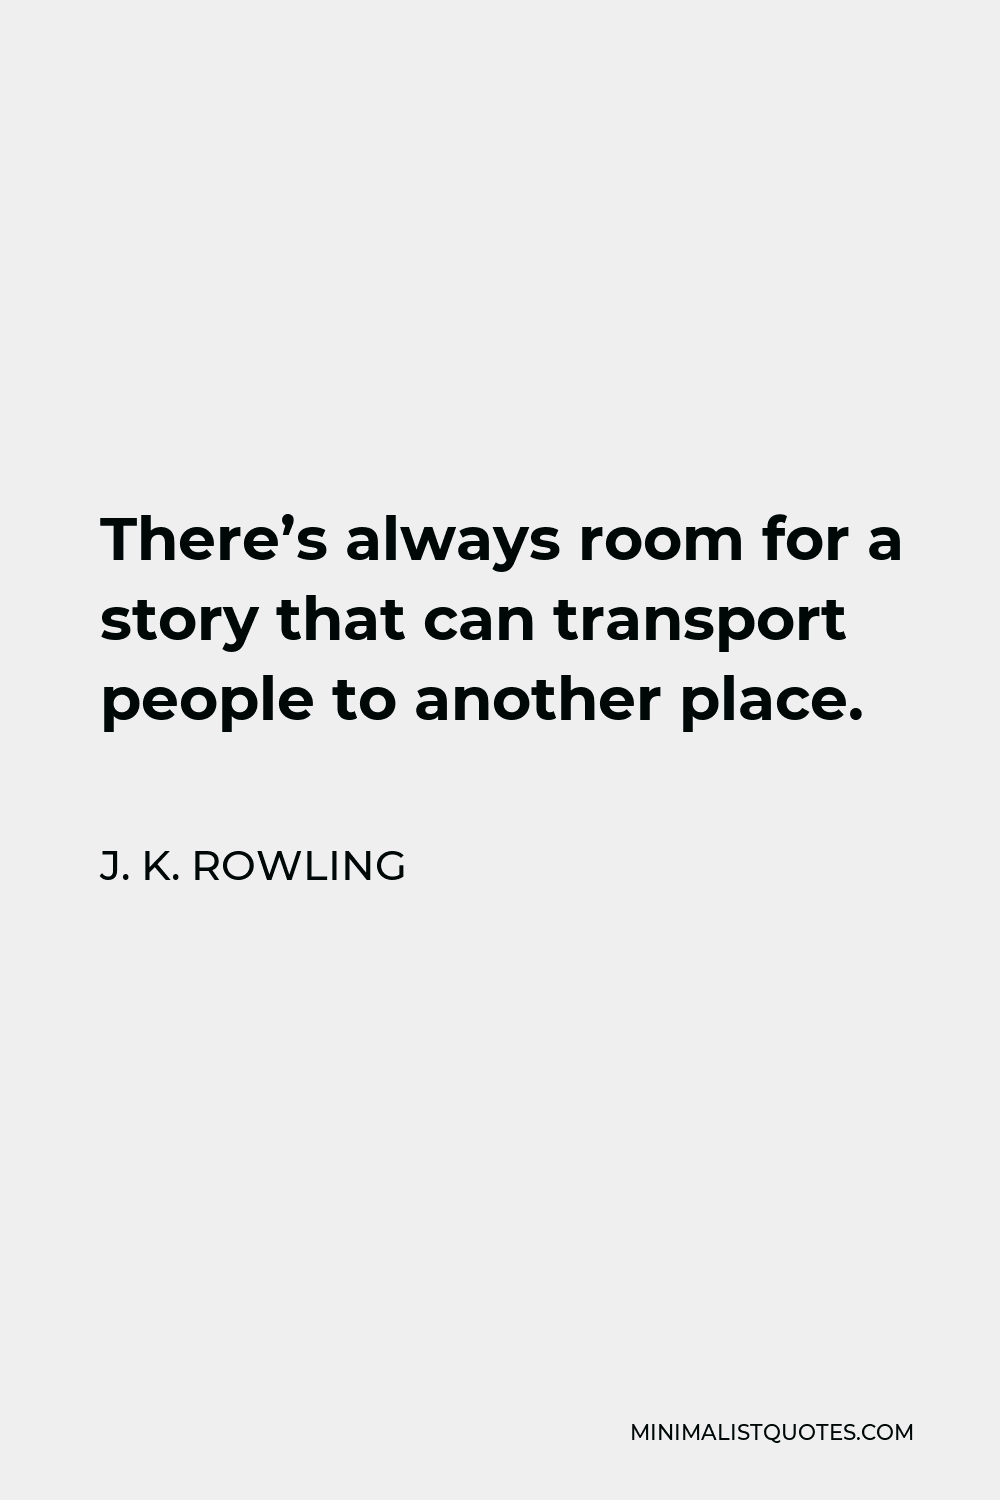 J. K. Rowling Quote - There’s always room for a story that can transport people to another place.